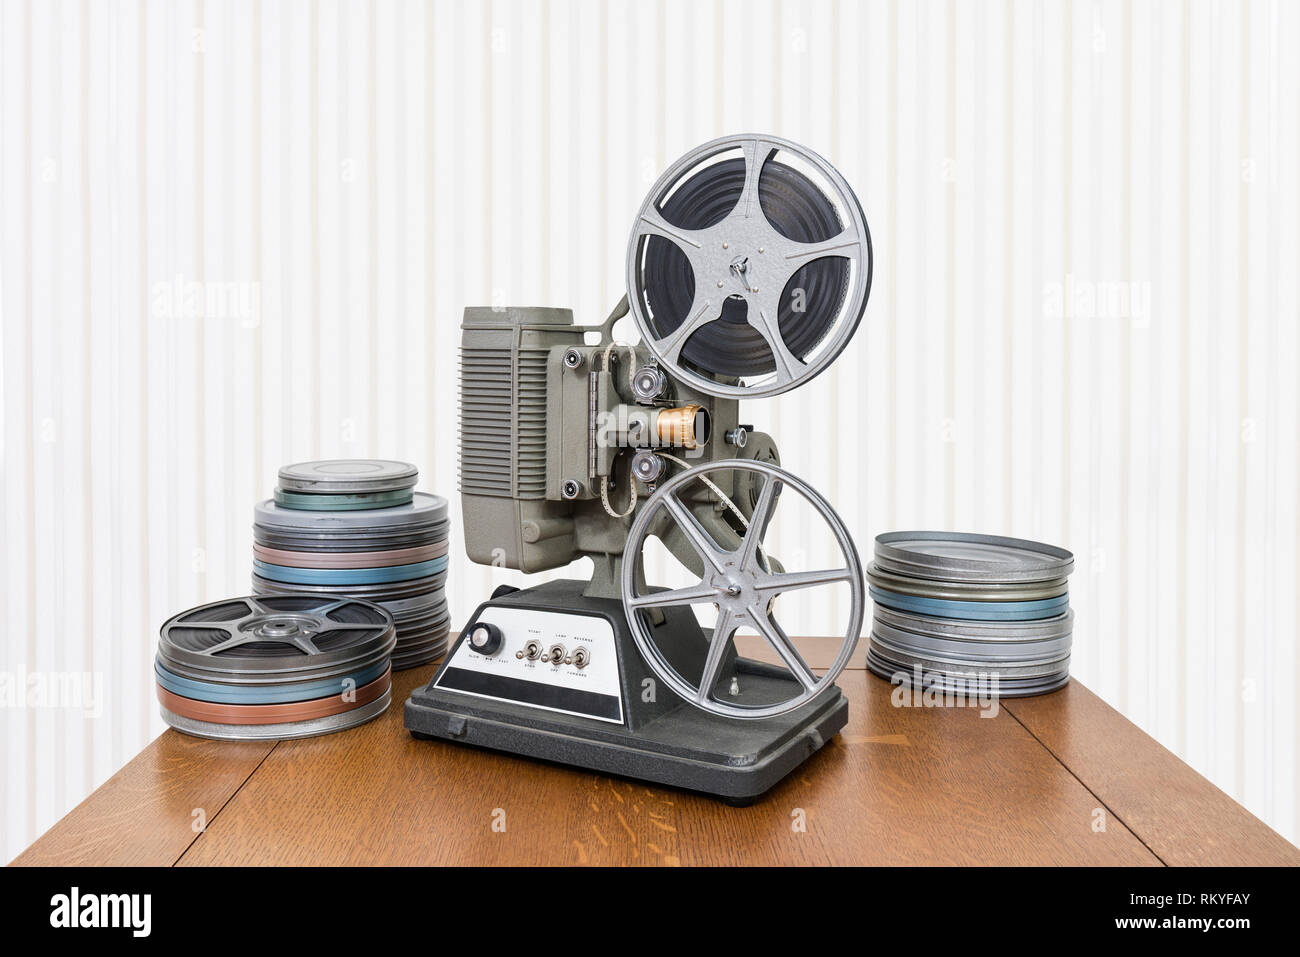 Vintage 8mm home movie projector and film cans on wood table Stock